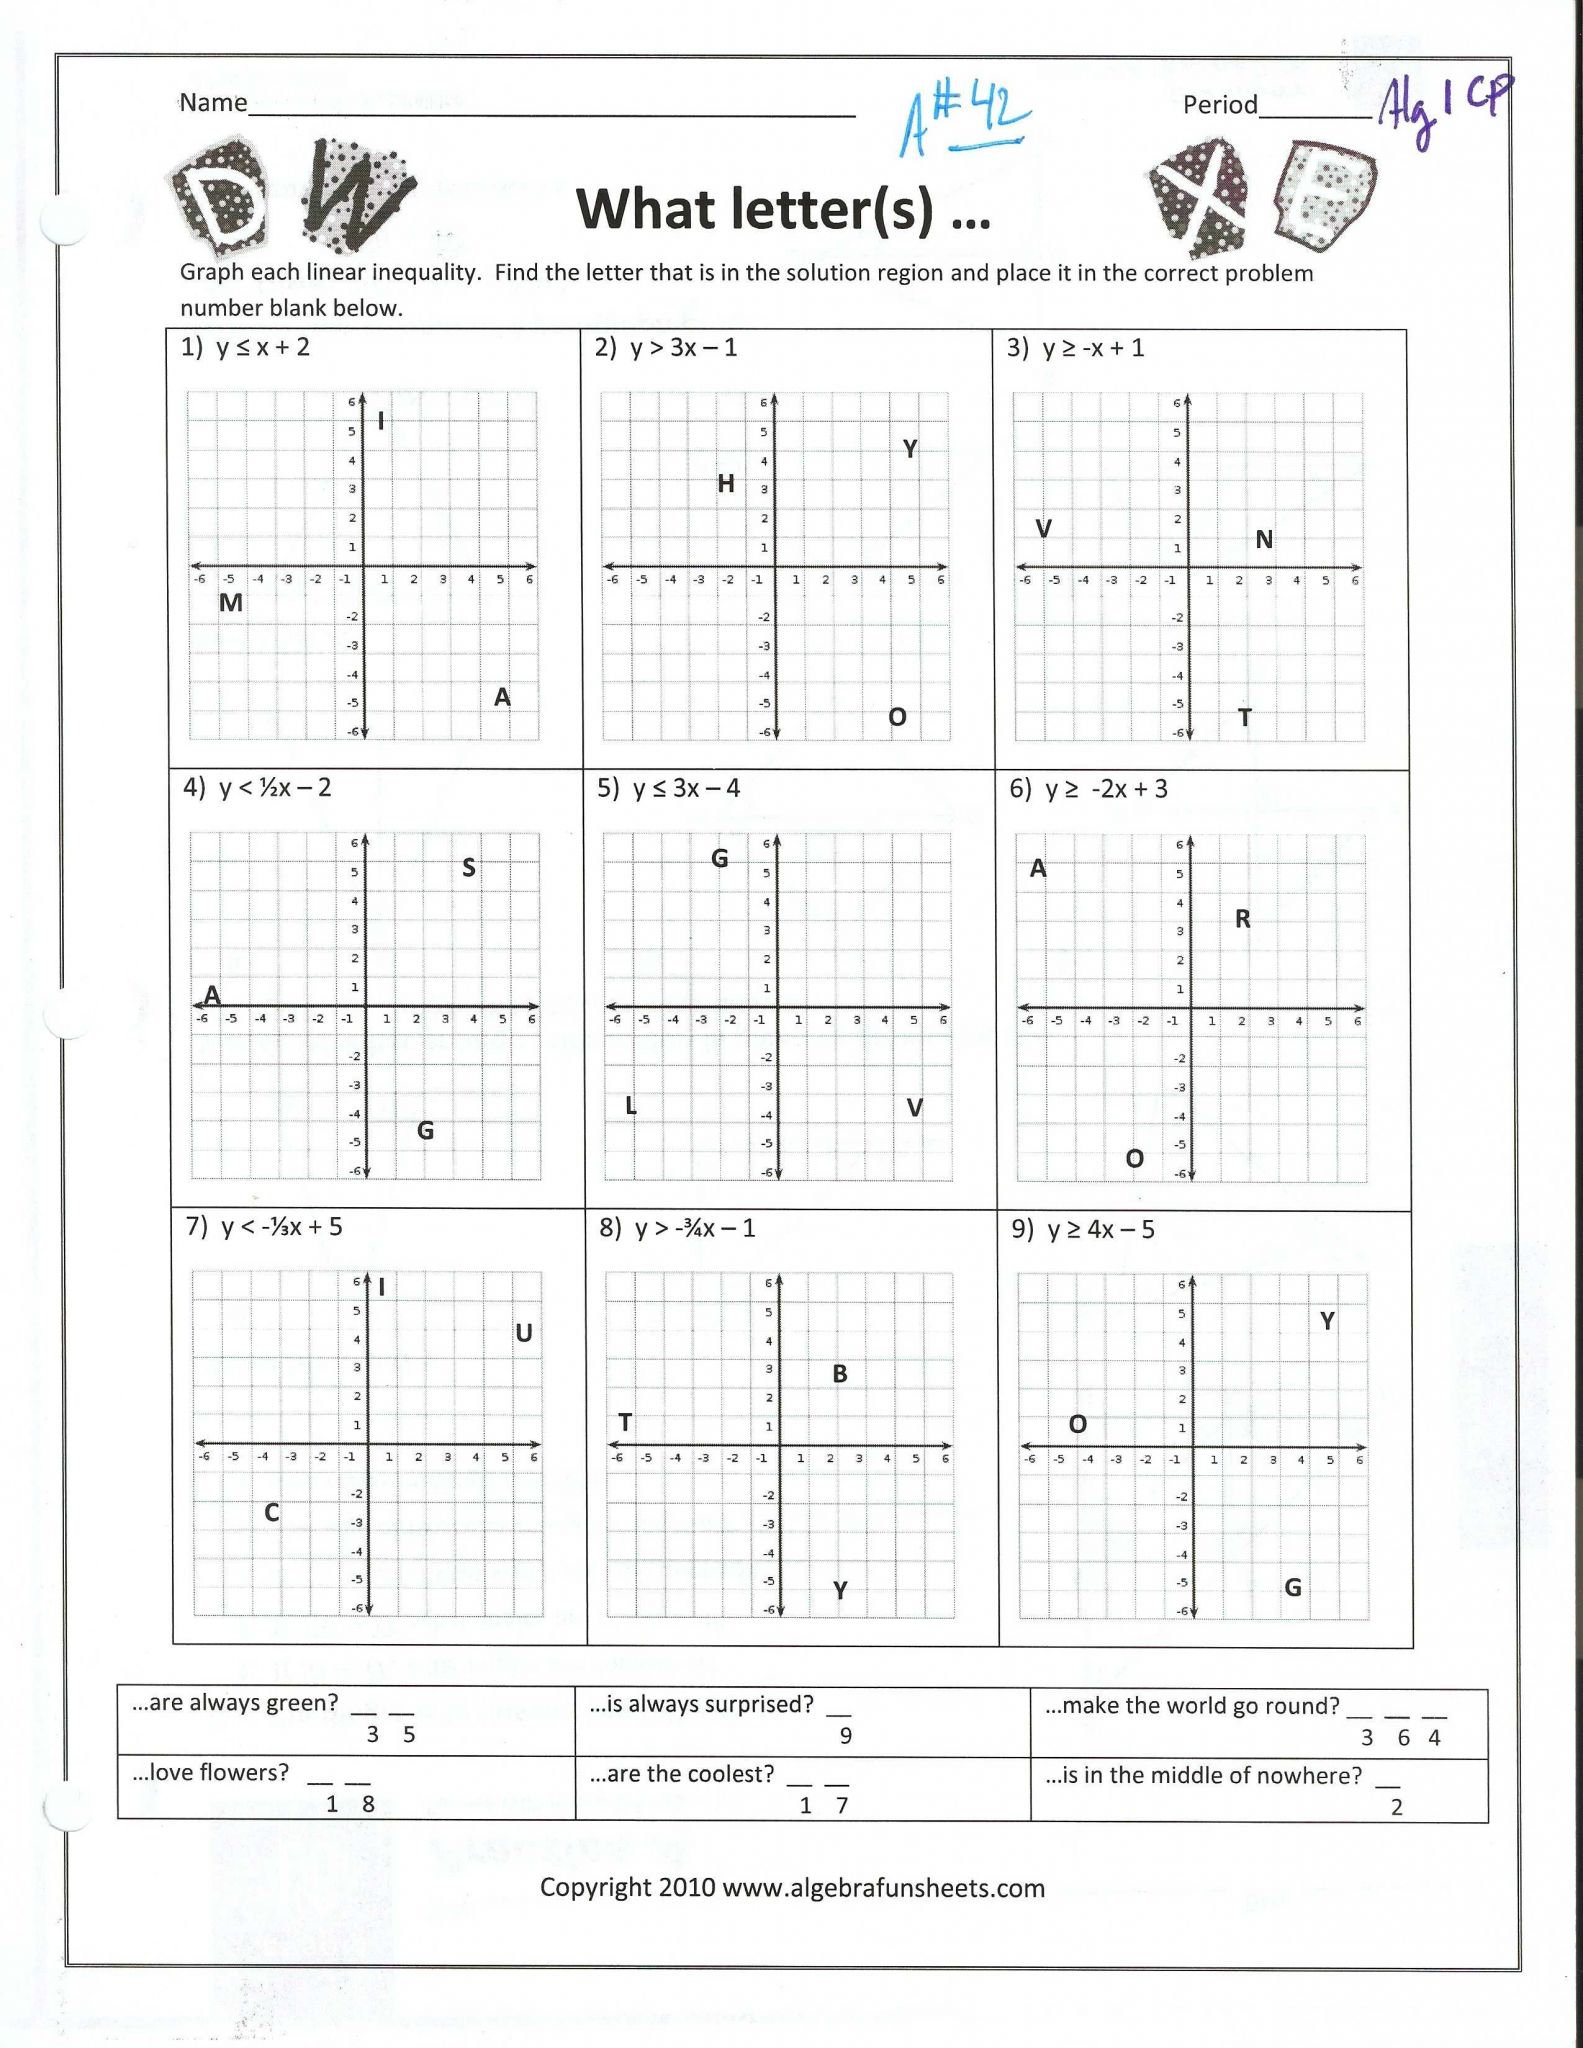 Child Anger Management Worksheets Also Domain and Range Graphs Worksheet Answers Fresh Properties the